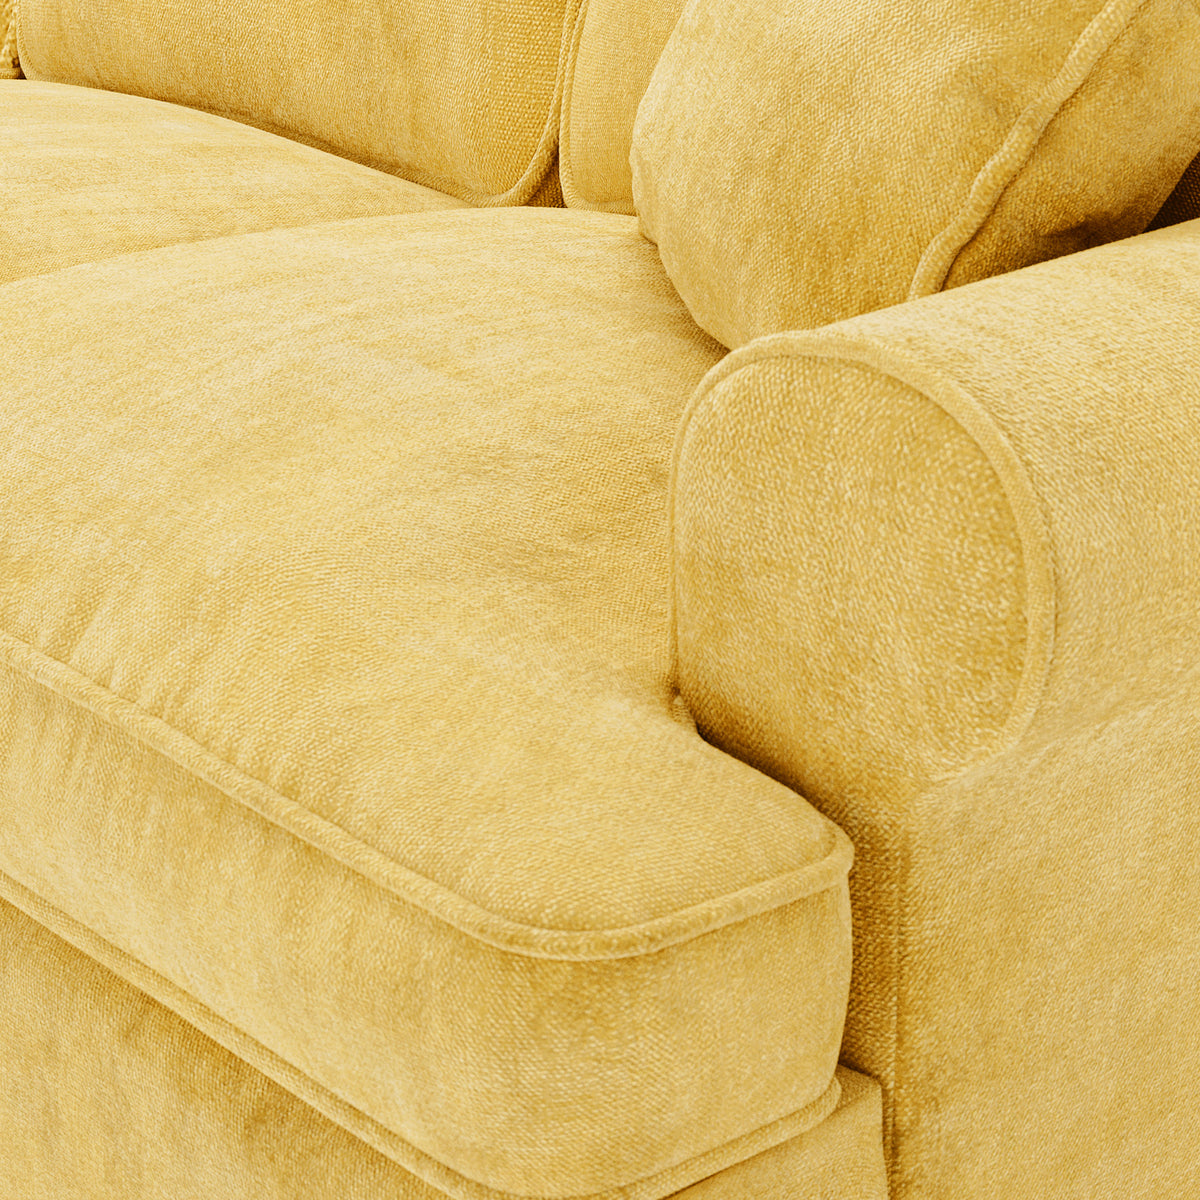 Alfie Gold 3 Seater Sofa from Roseland Furniture